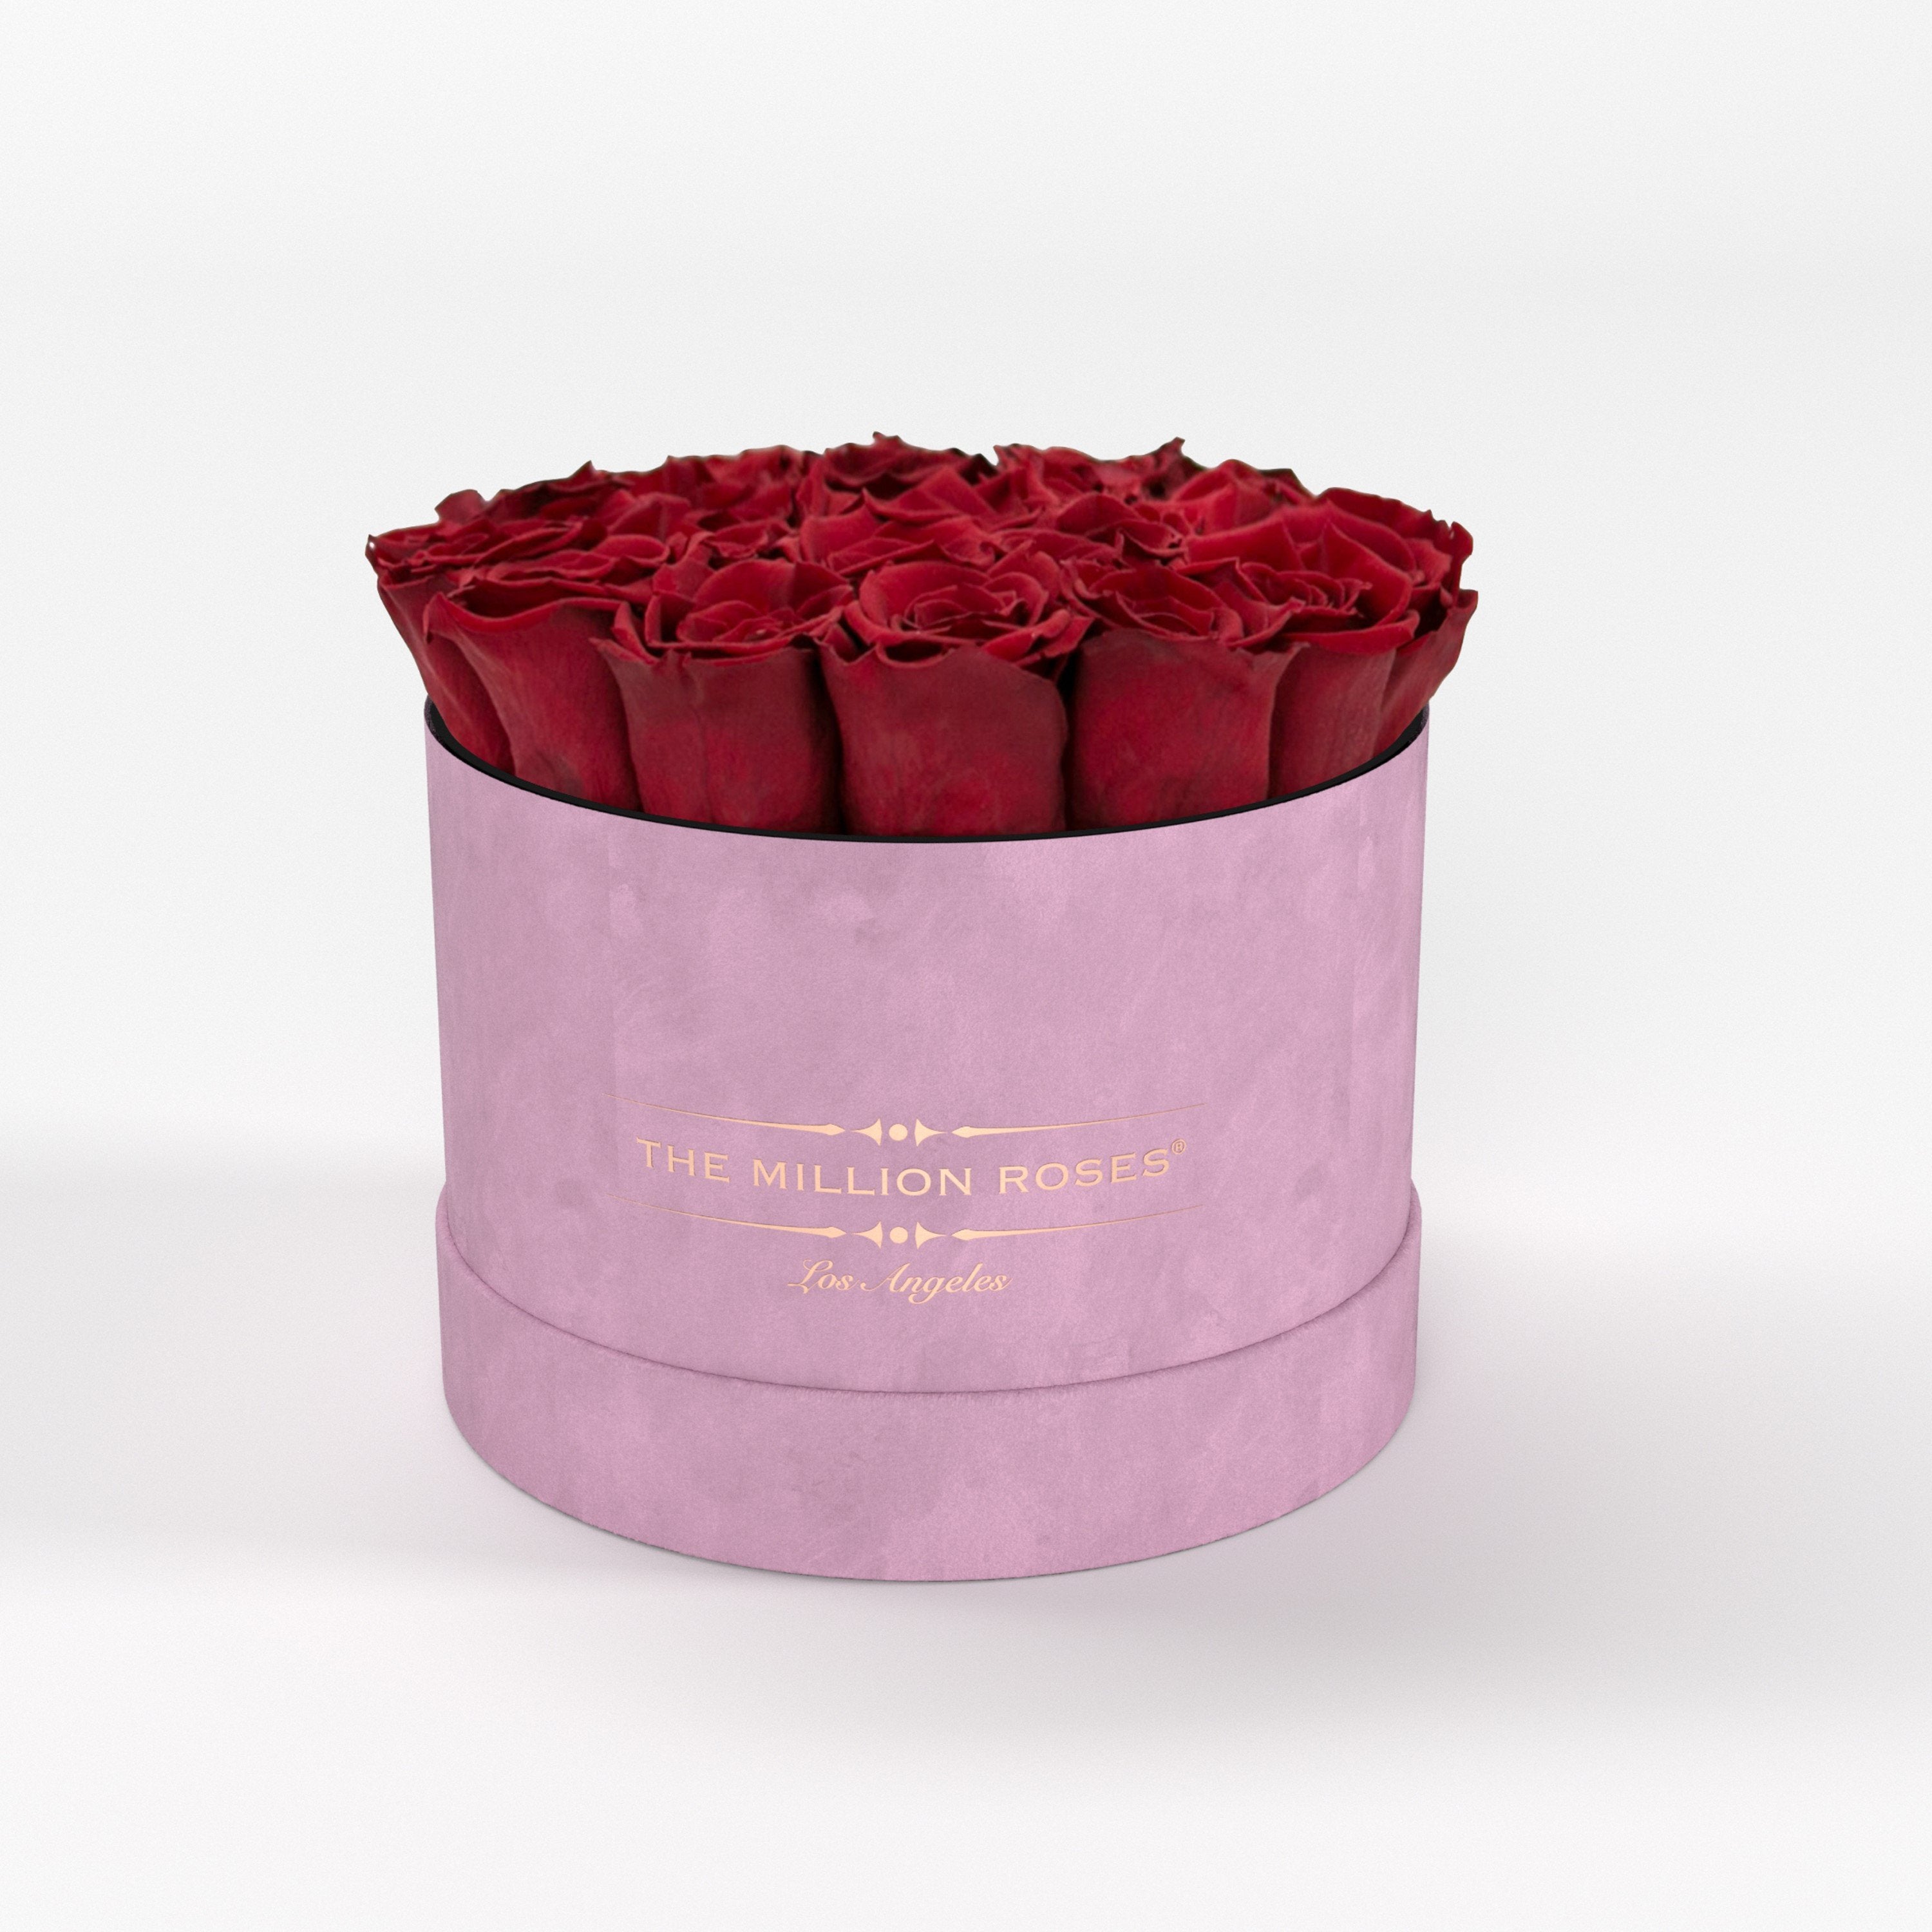 ( LA ) Light Pink - Suede - Classic Box with Red Roses Kit - the million roses